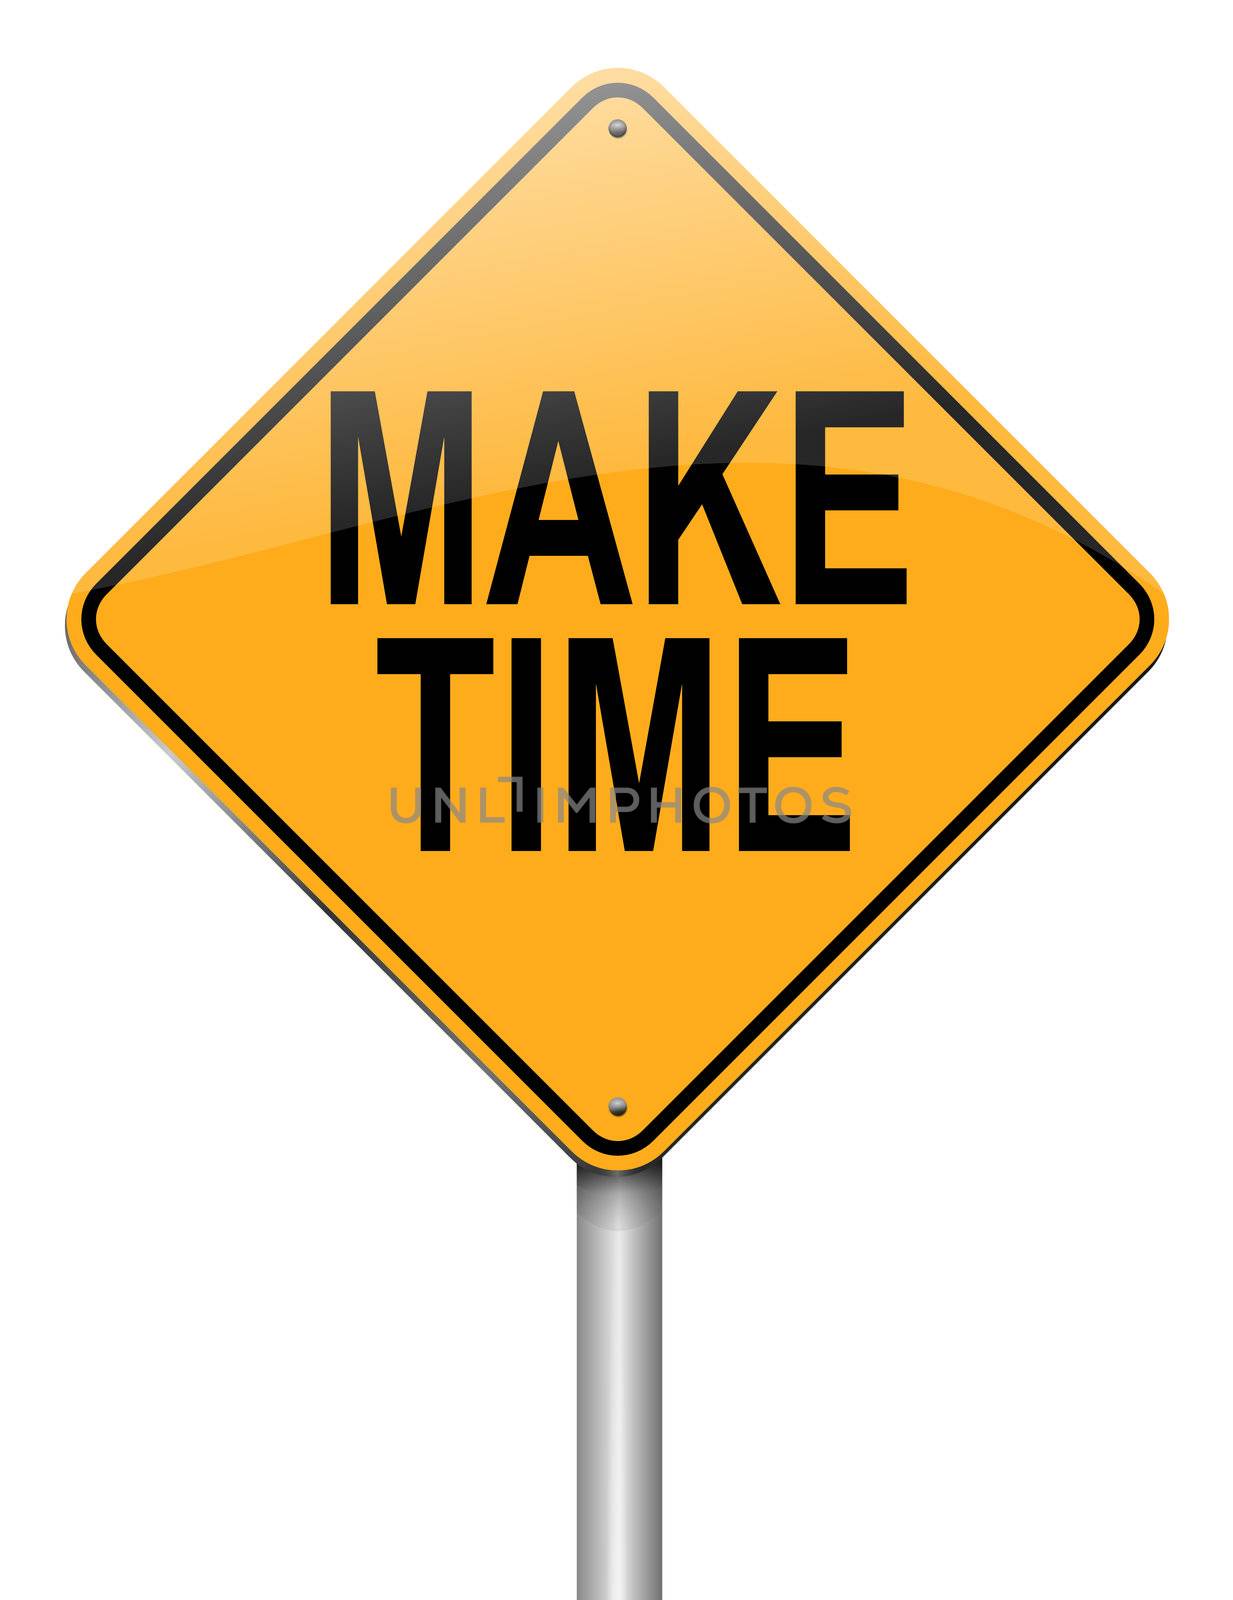 Illustration depicting a roadsign with a make time concept. White background.